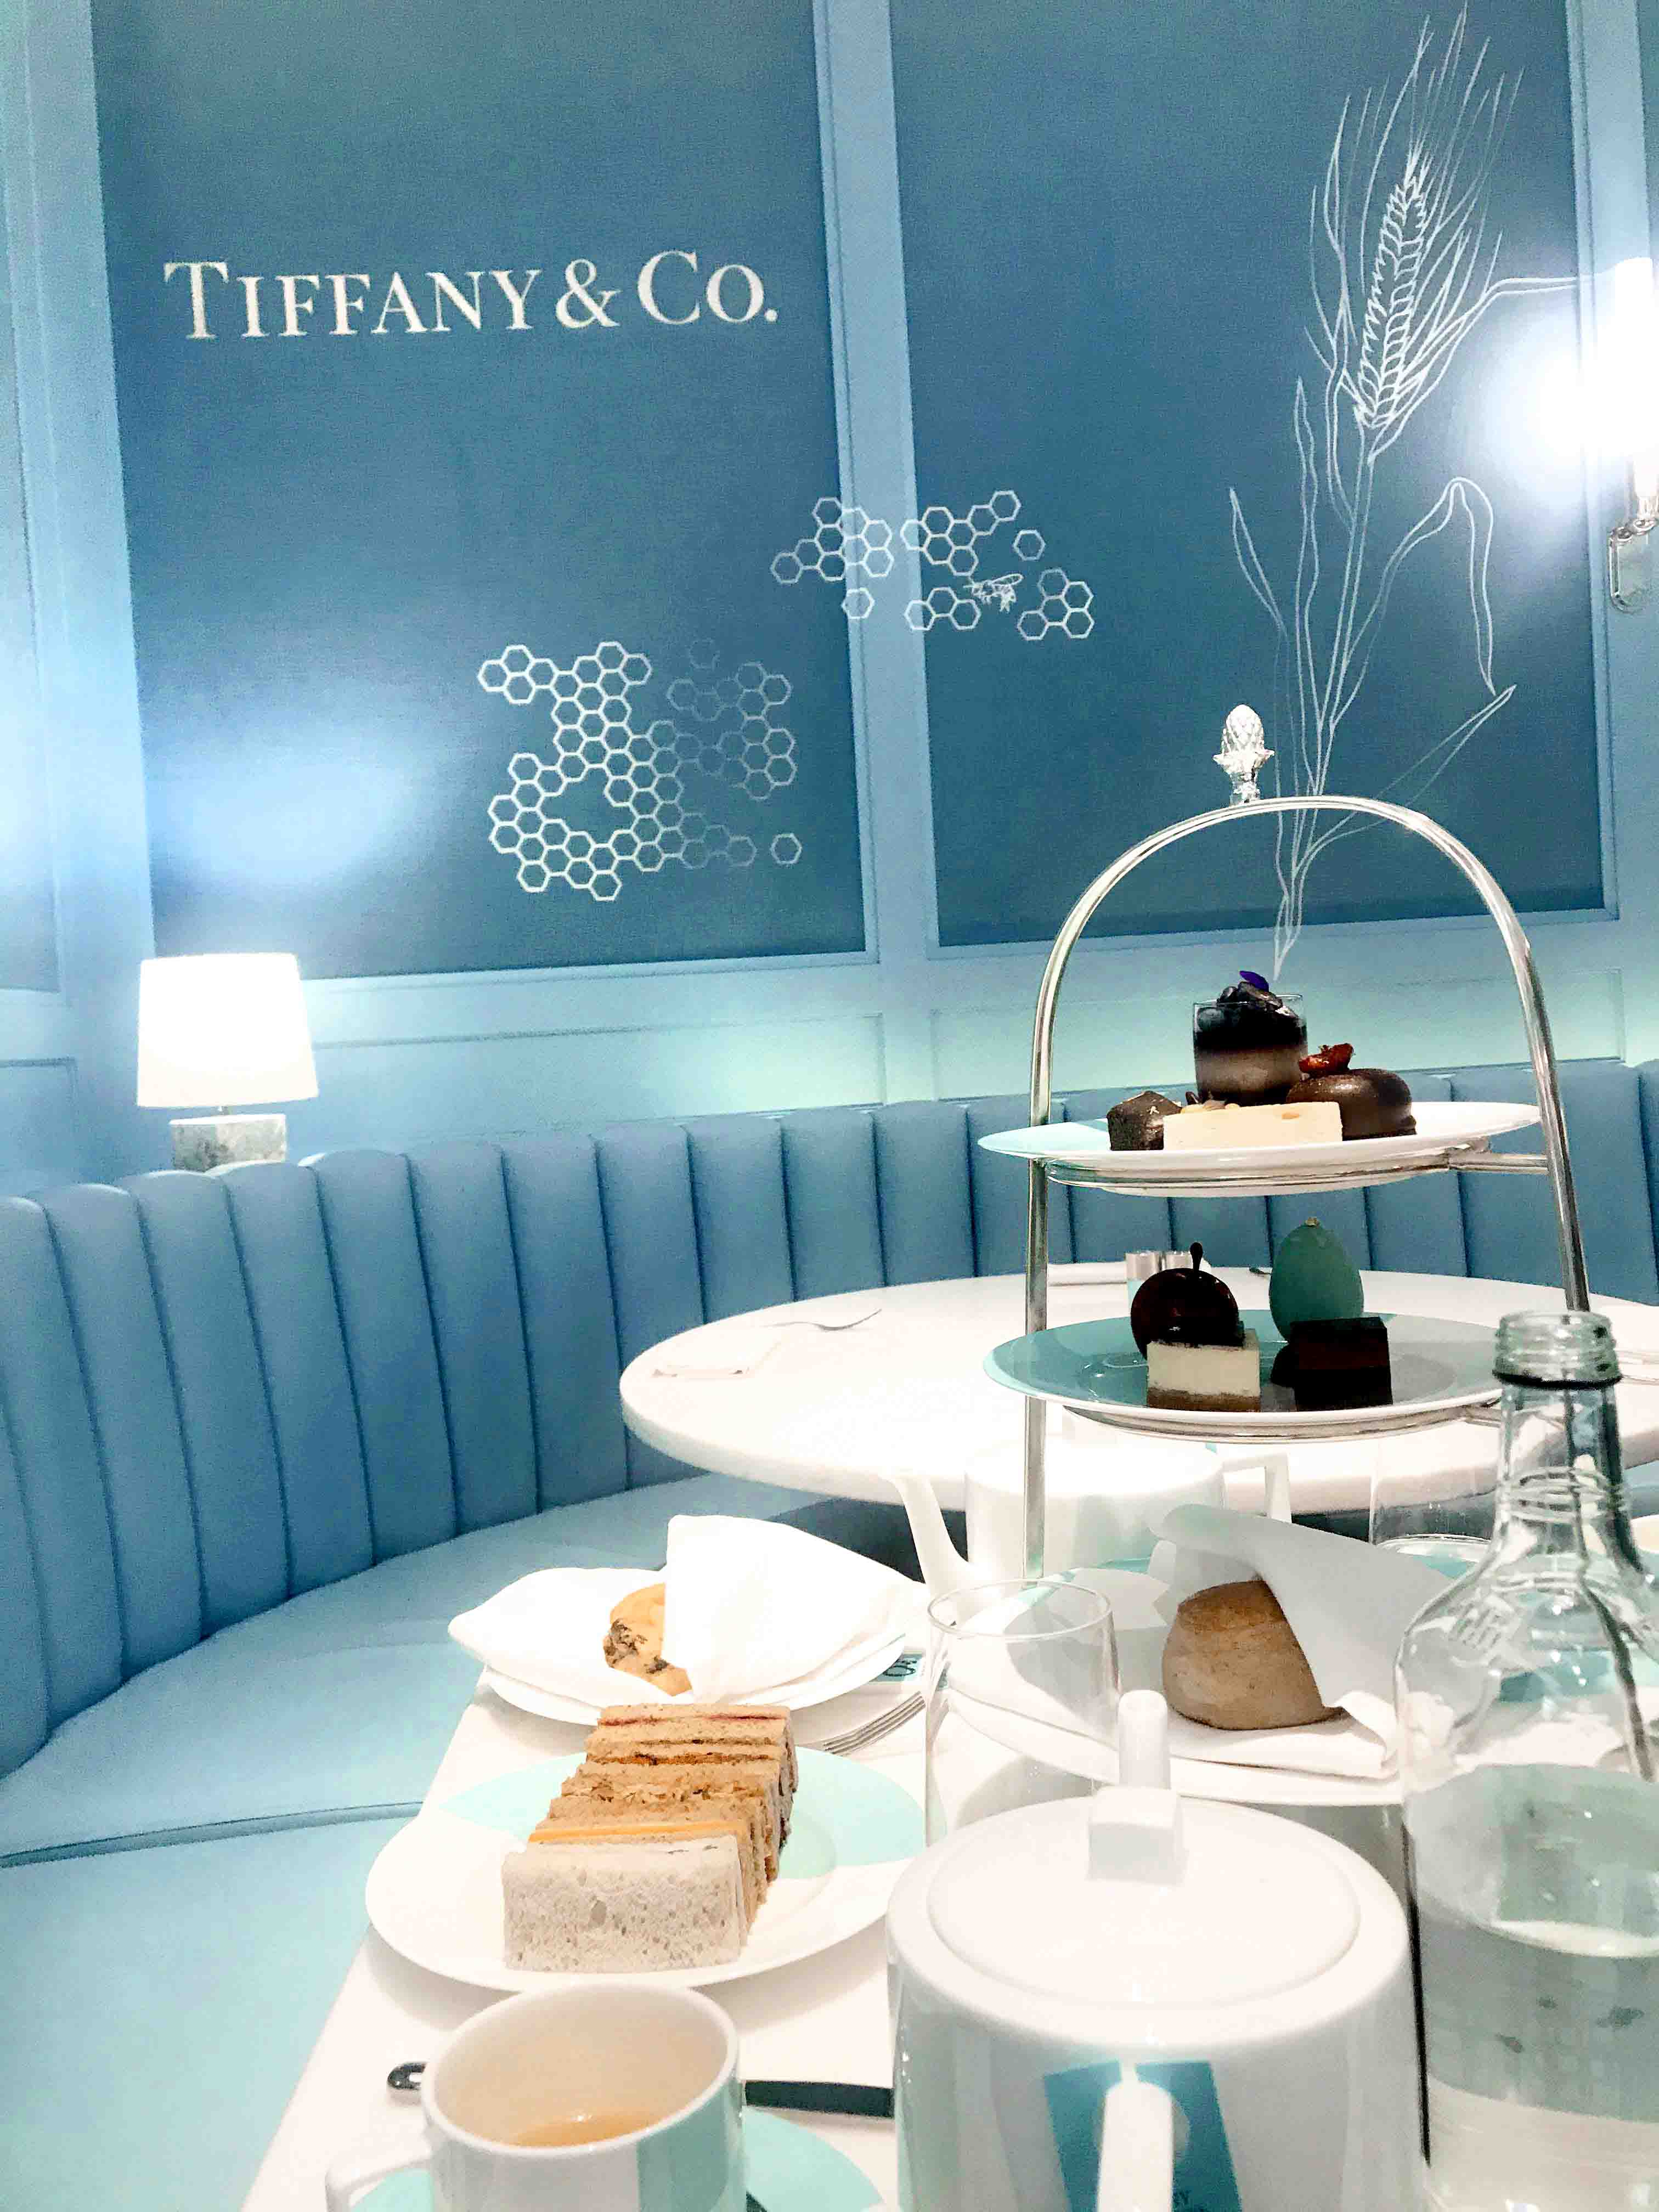 At Tiffany, Something New Inside the Blue Box - The New York Times